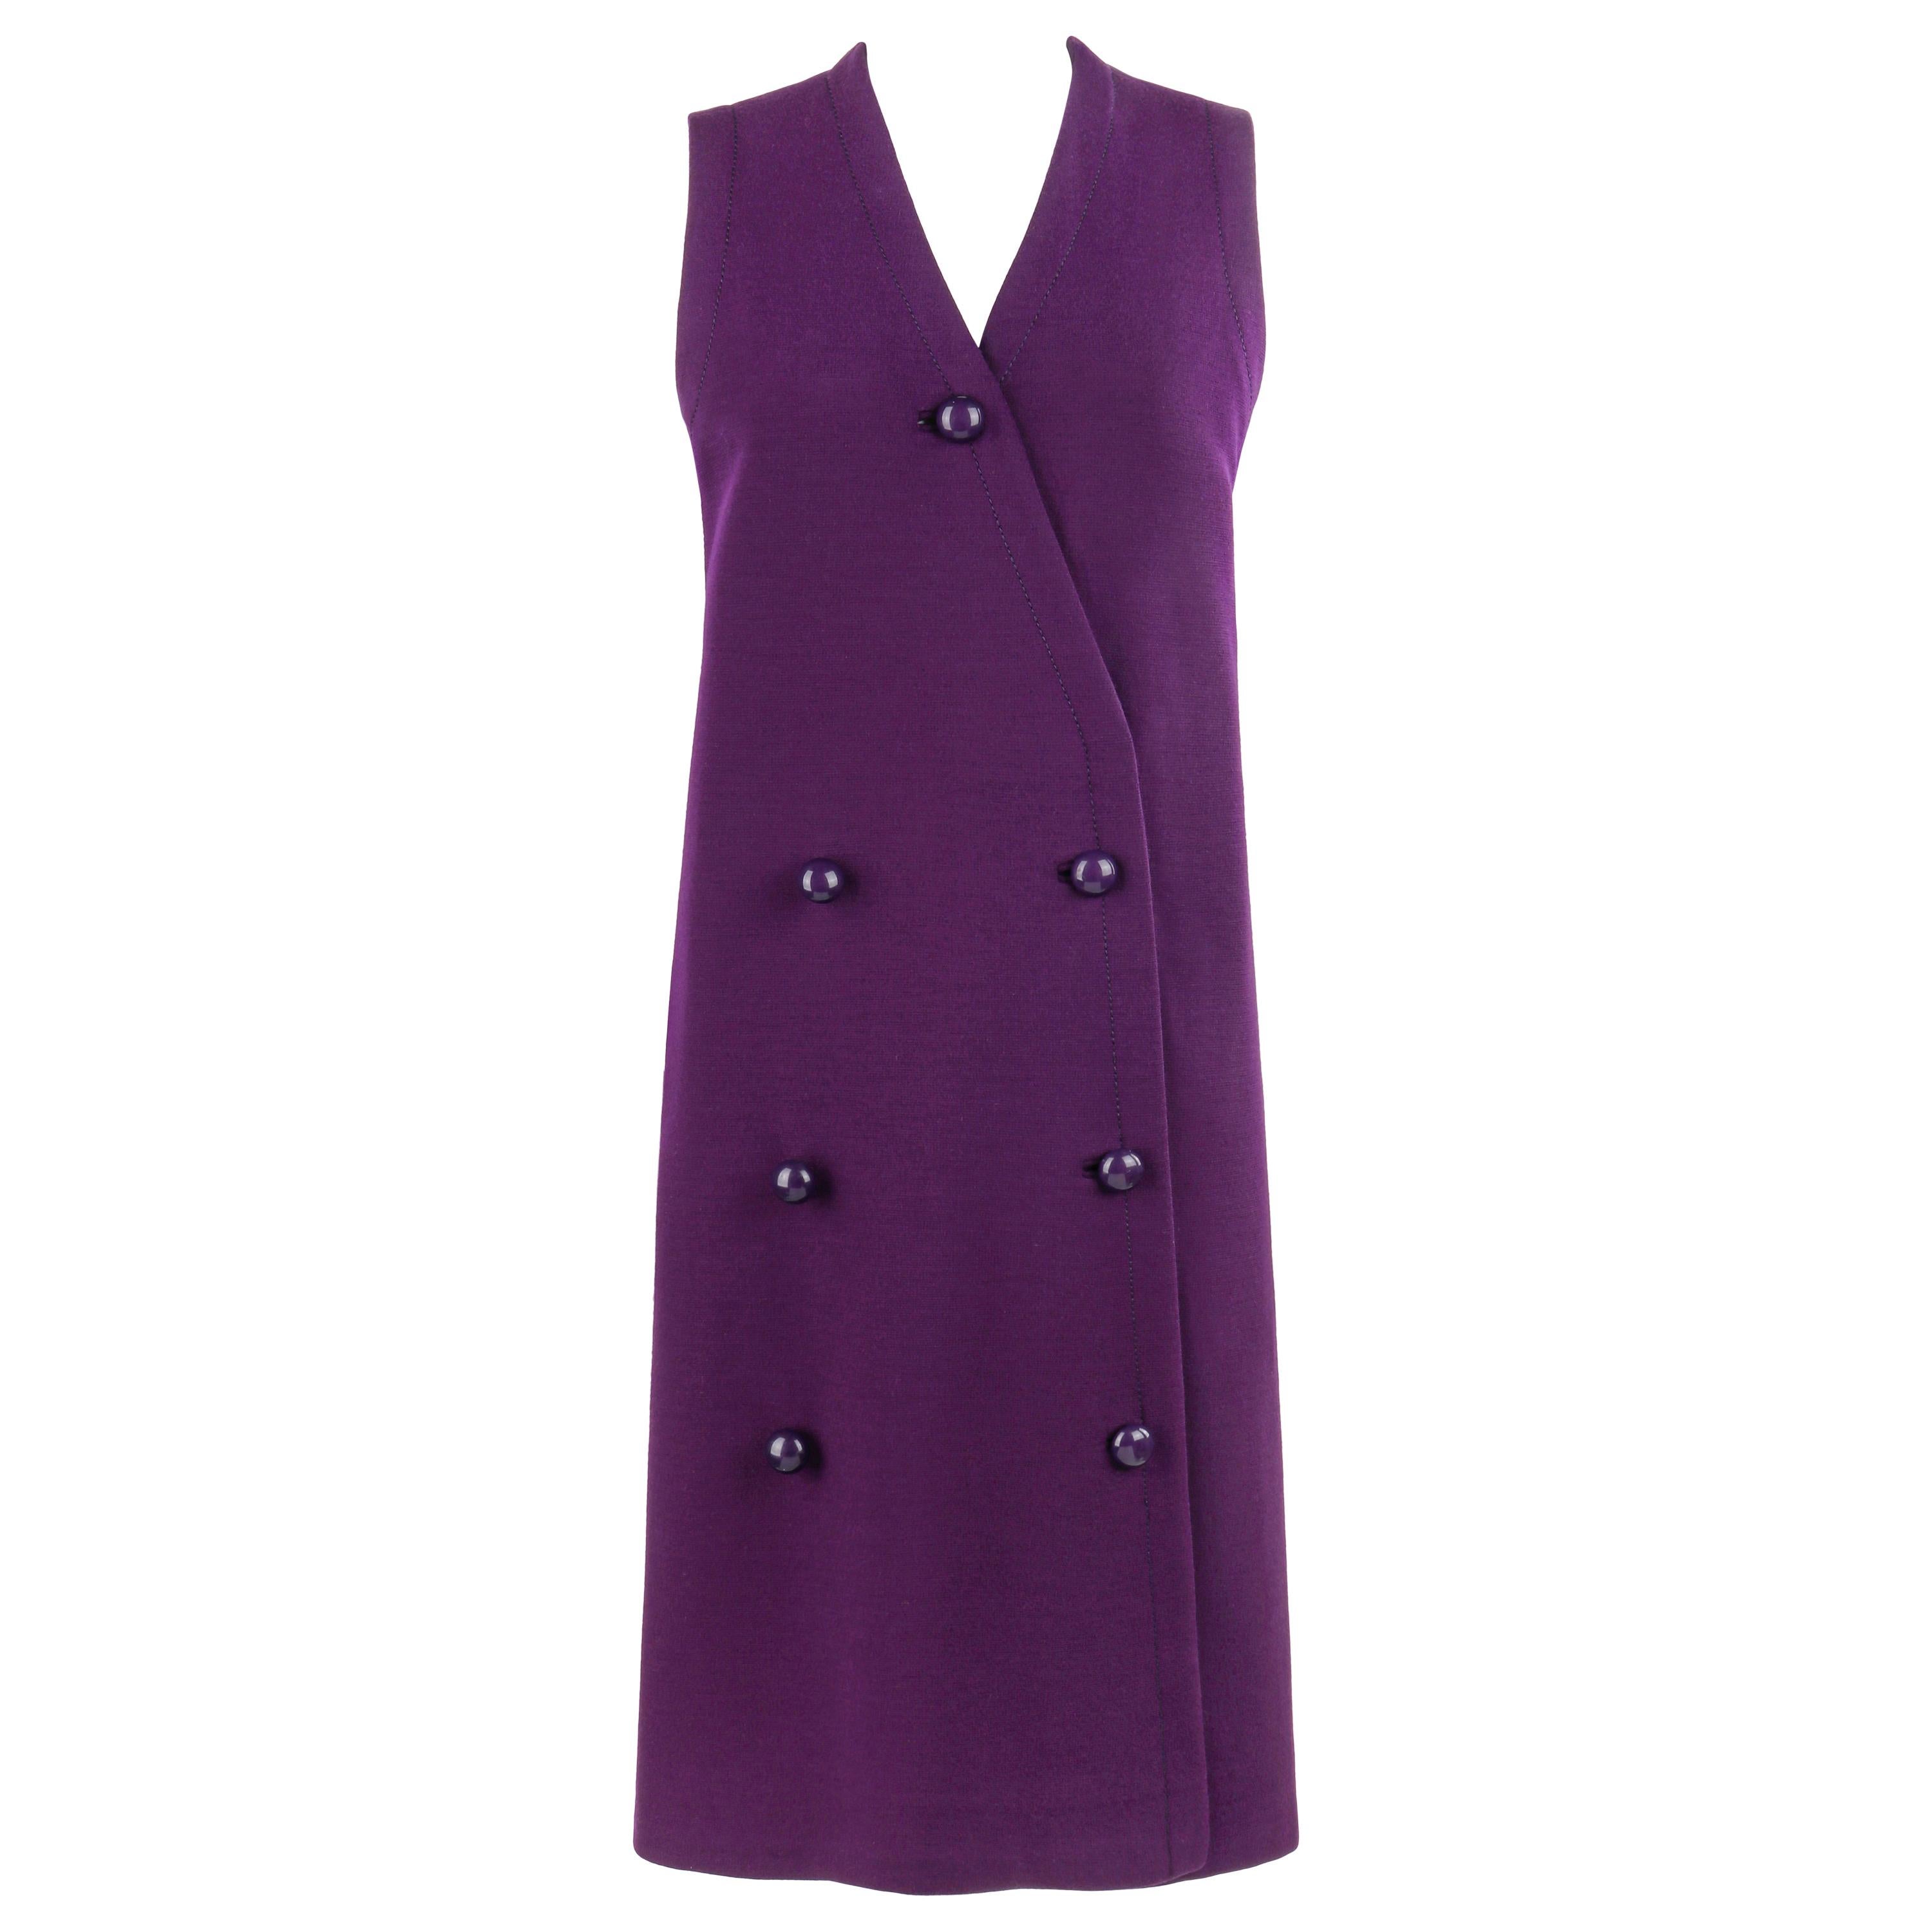 JEAN PATOU c.1960's Purple Sleeveless Double Breasted Button Up Mod Shift Dress For Sale